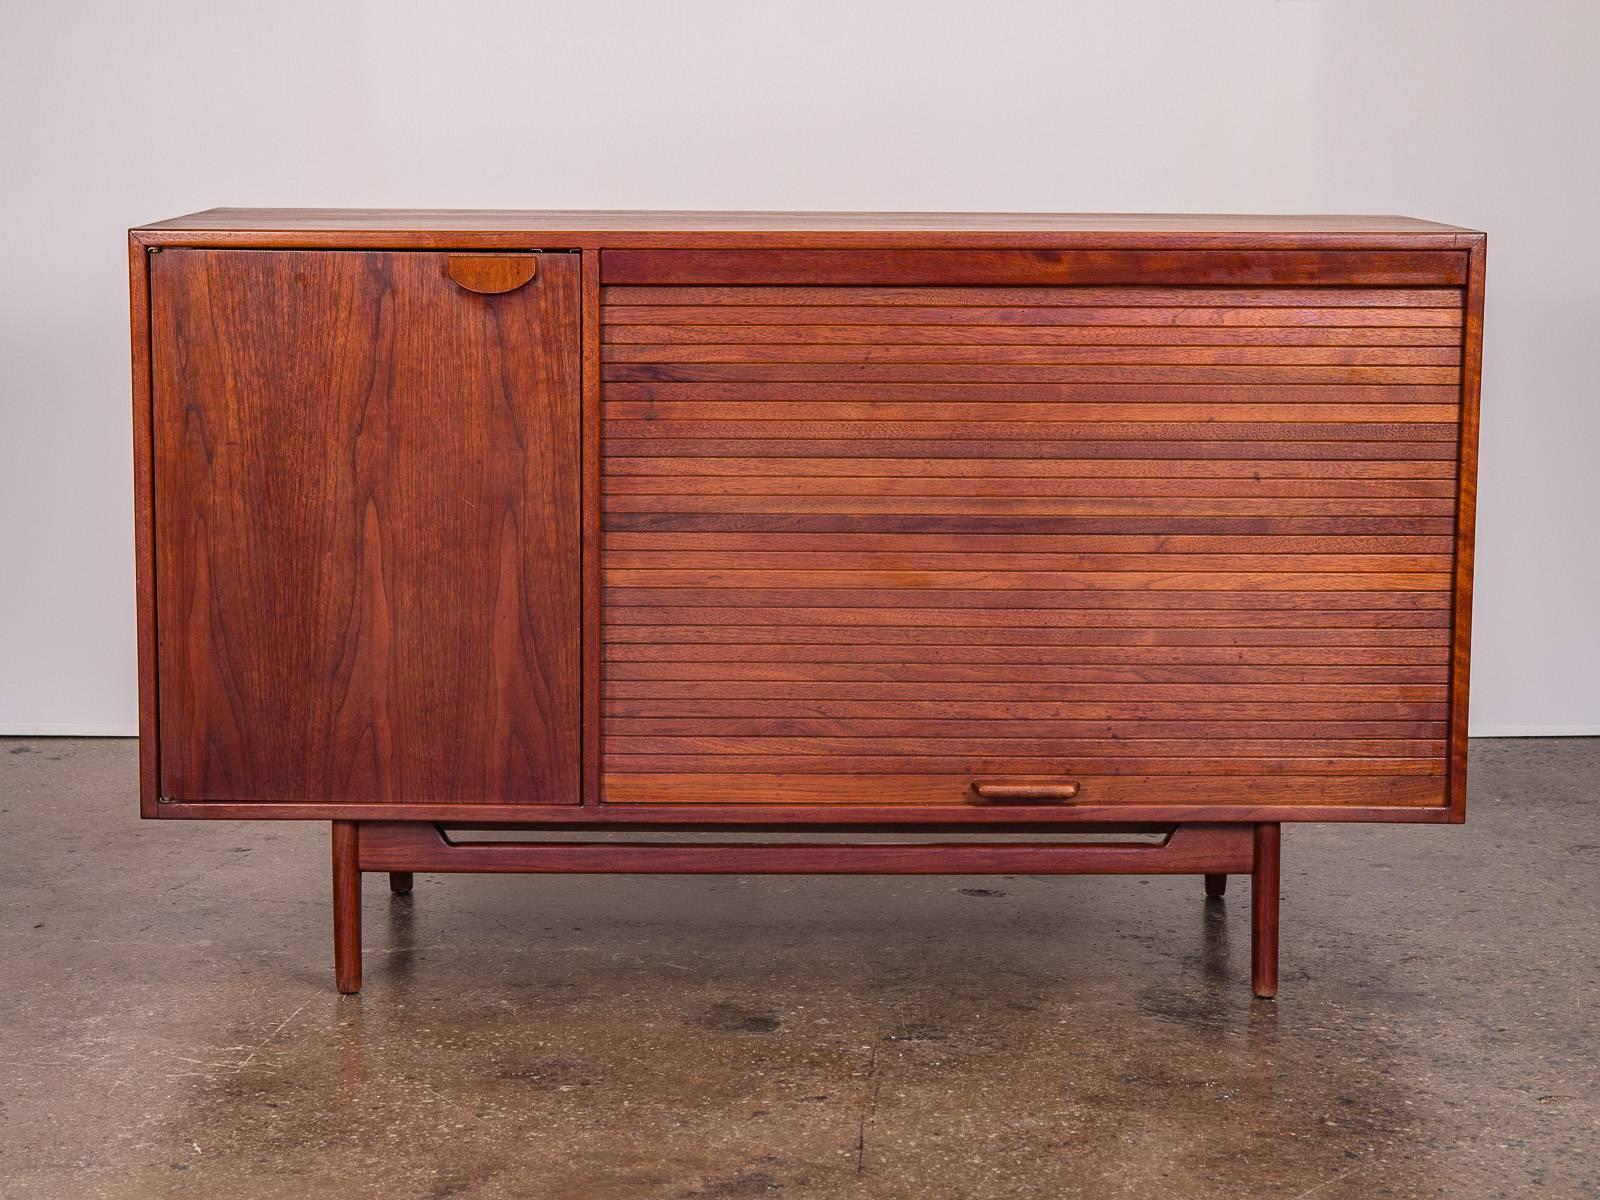 Late 1960s walnut tambour door credenza by Jens Risom. Sturdy bodied, mid-sized credenza has been fully restored and retains its gleaming period-specific patina. The two storage areas have adjustable shelving inside, and are adorned with the